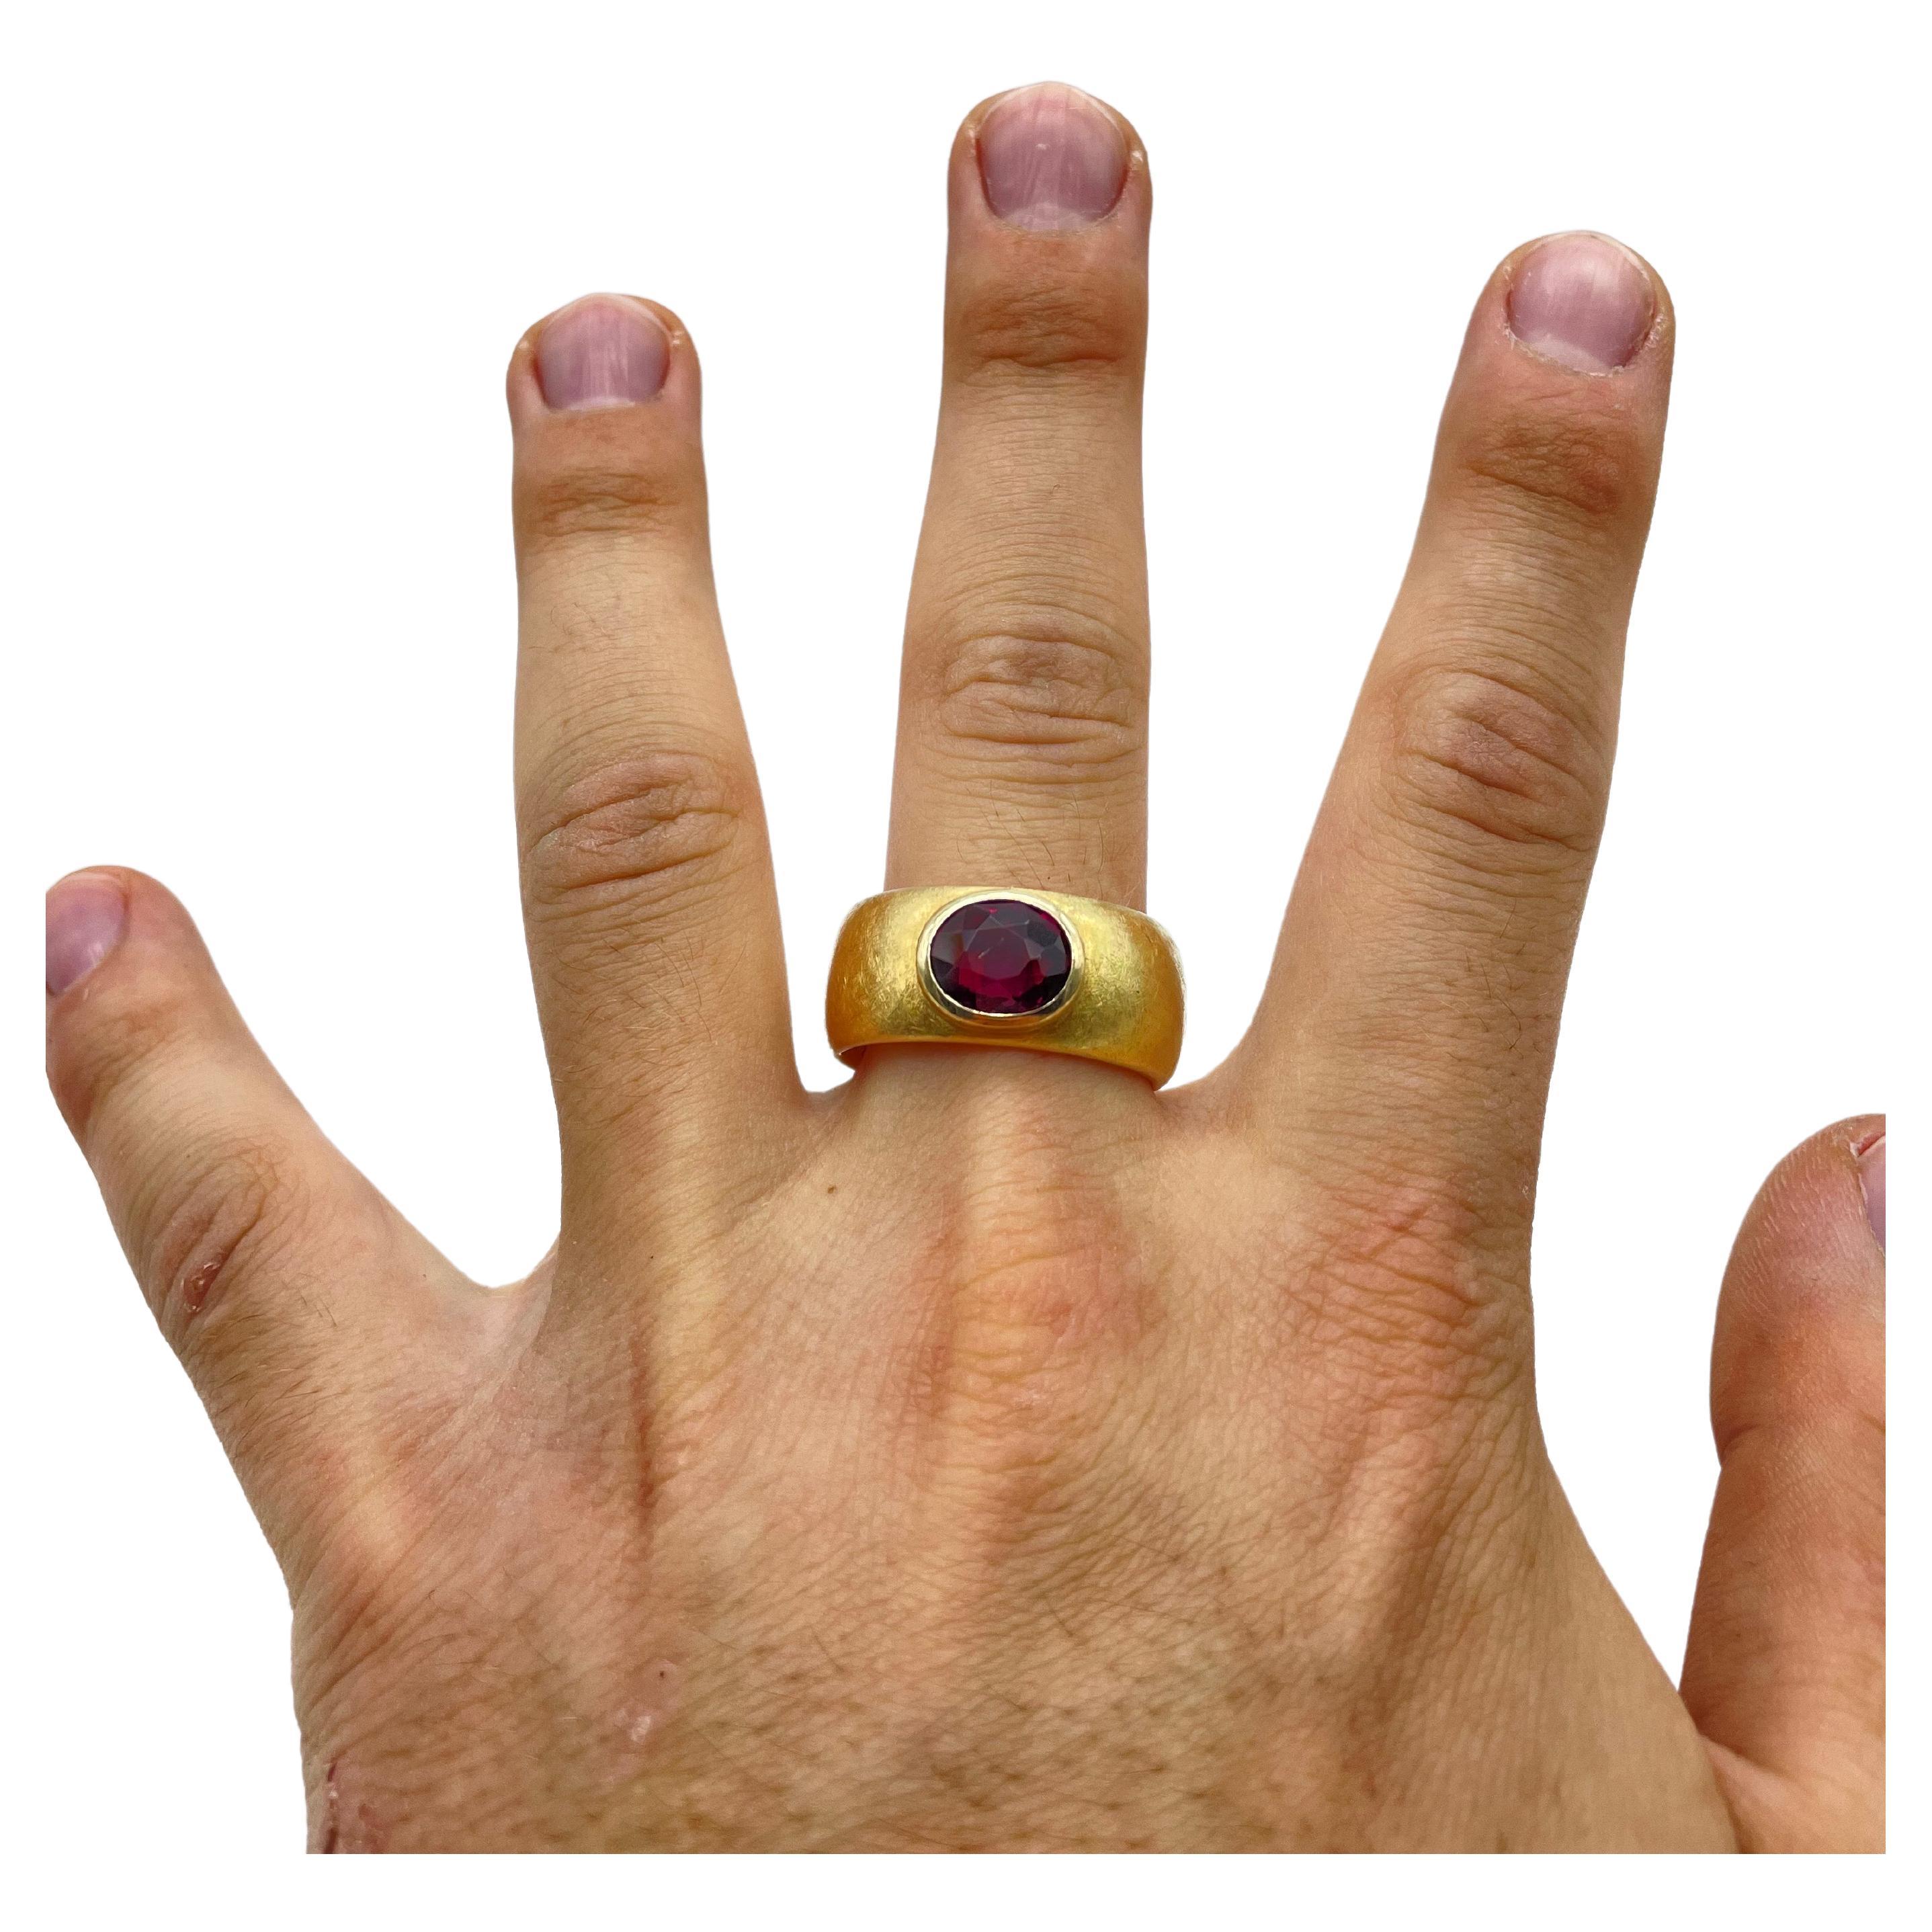 Introducing the majestic and powerful men's ring adorned with a commanding amethyst in an oval cut. This remarkable ring is not for the faint of heart—it exudes strength and asserts dominance. With a weight of 29.5g, it carries a substantial